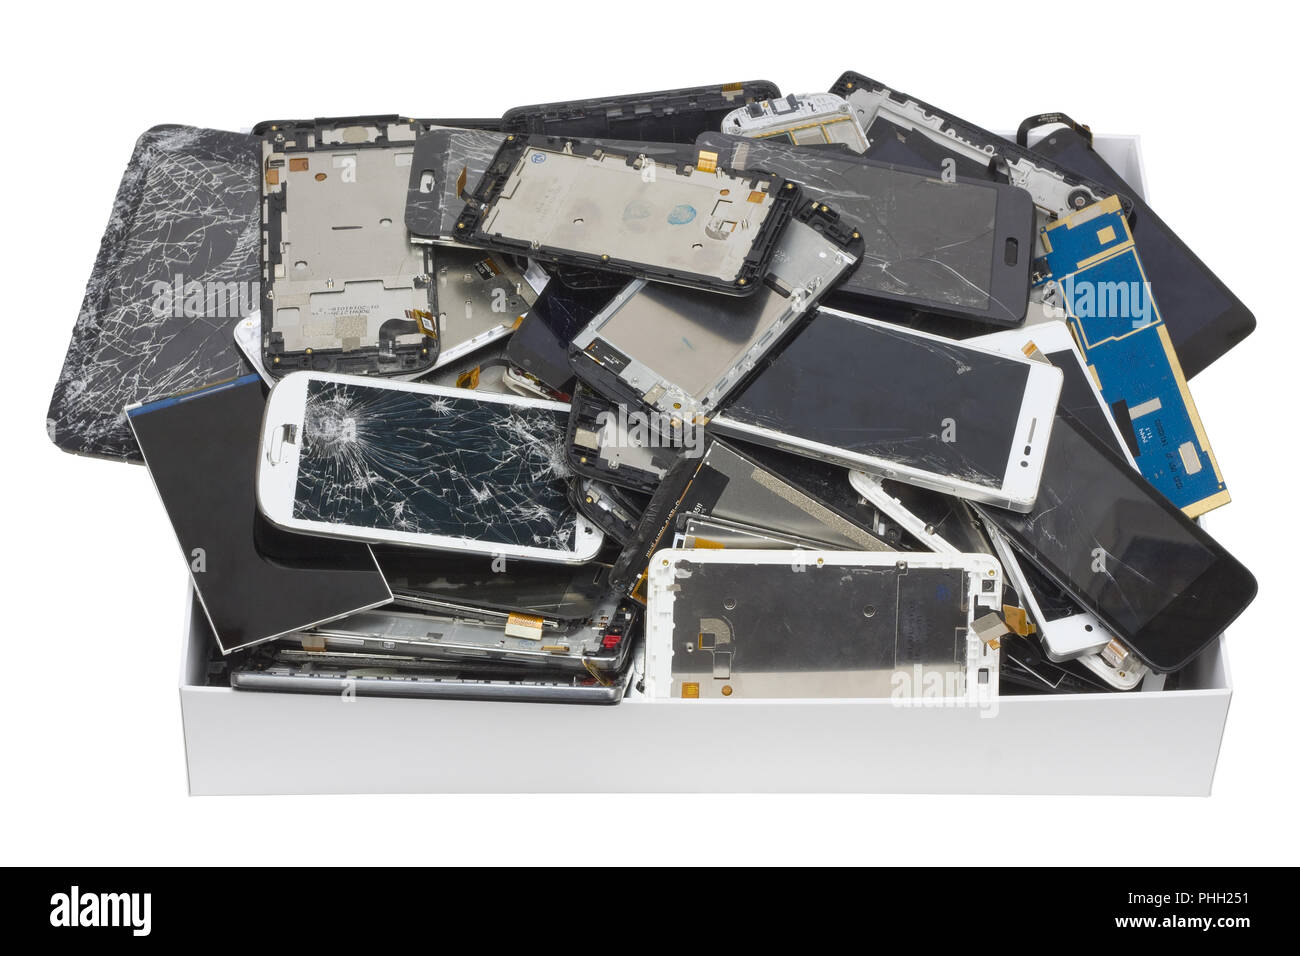 Broken phones and tablets  in the white cardboard box Stock Photo